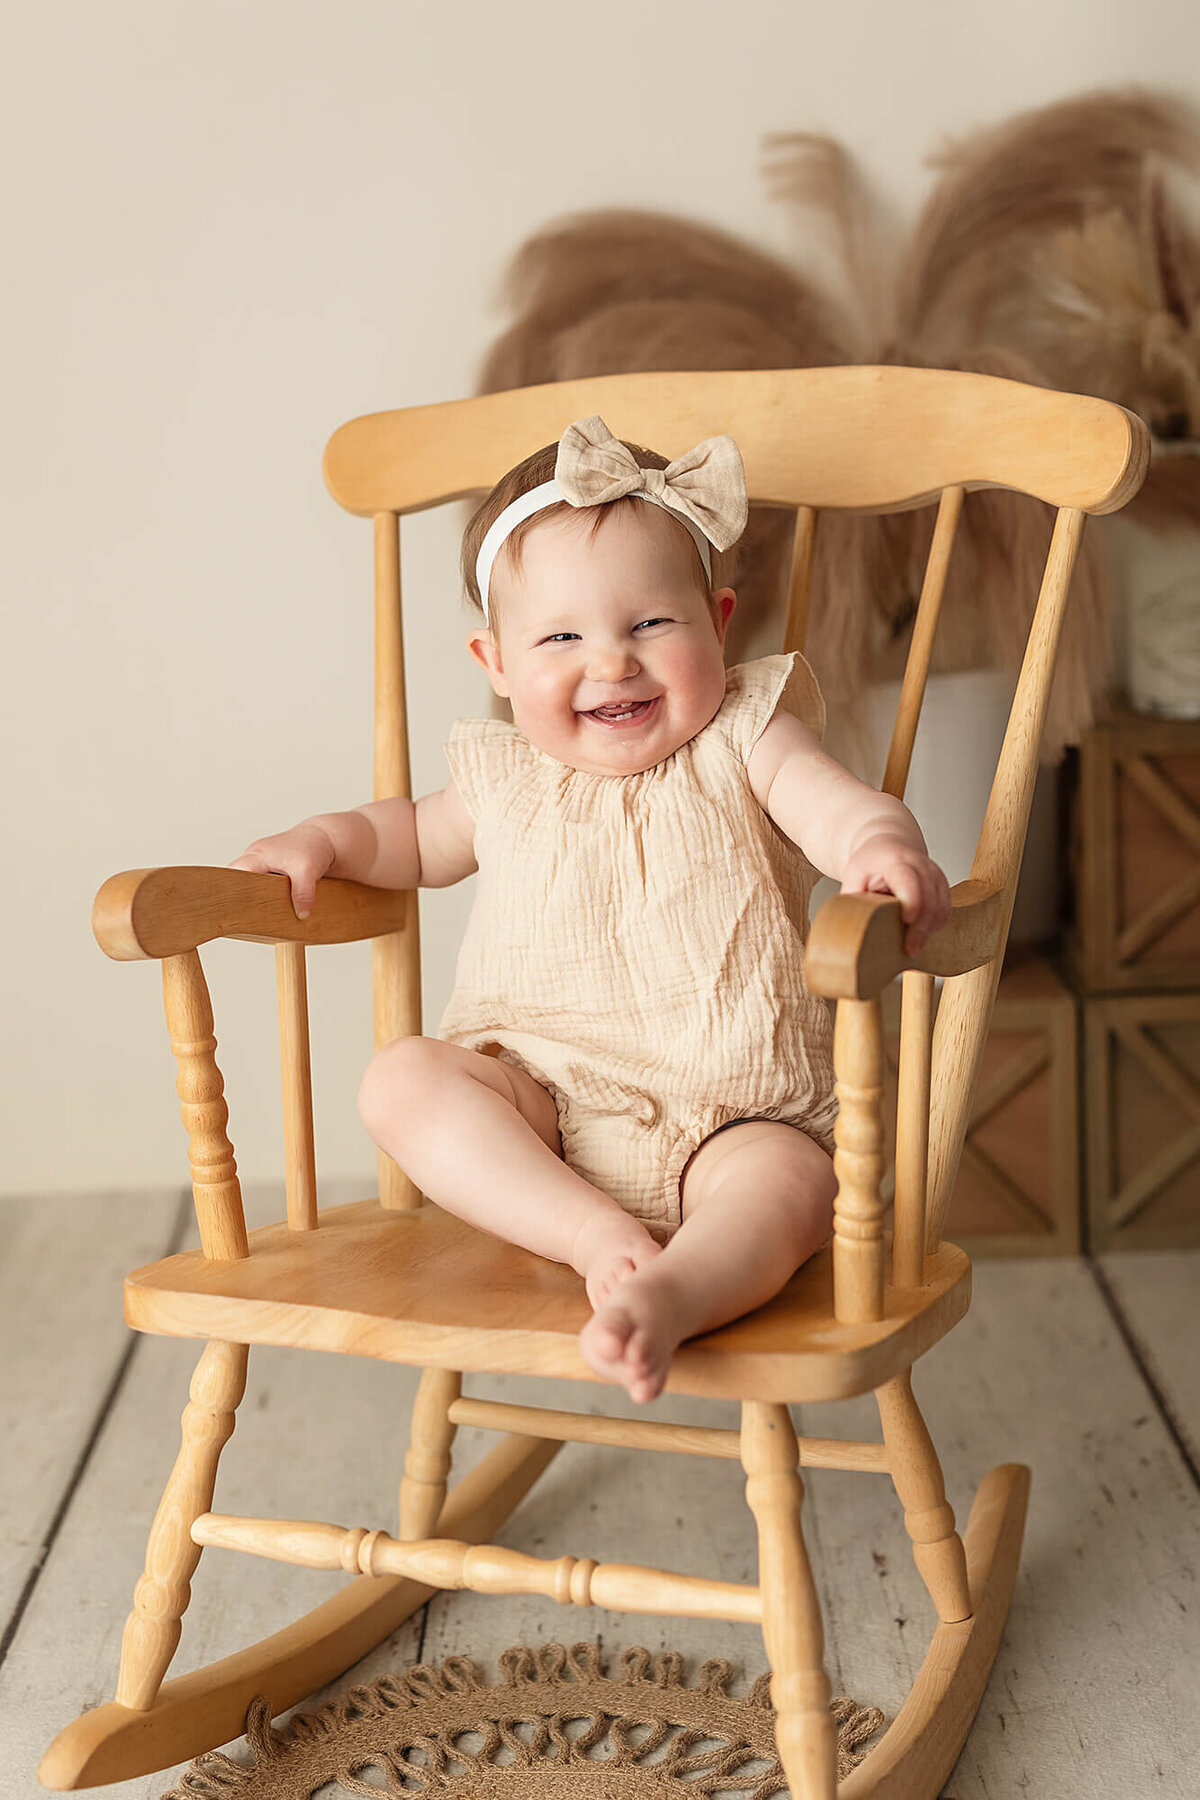 Cute baby girl smiling in a rocking chair.